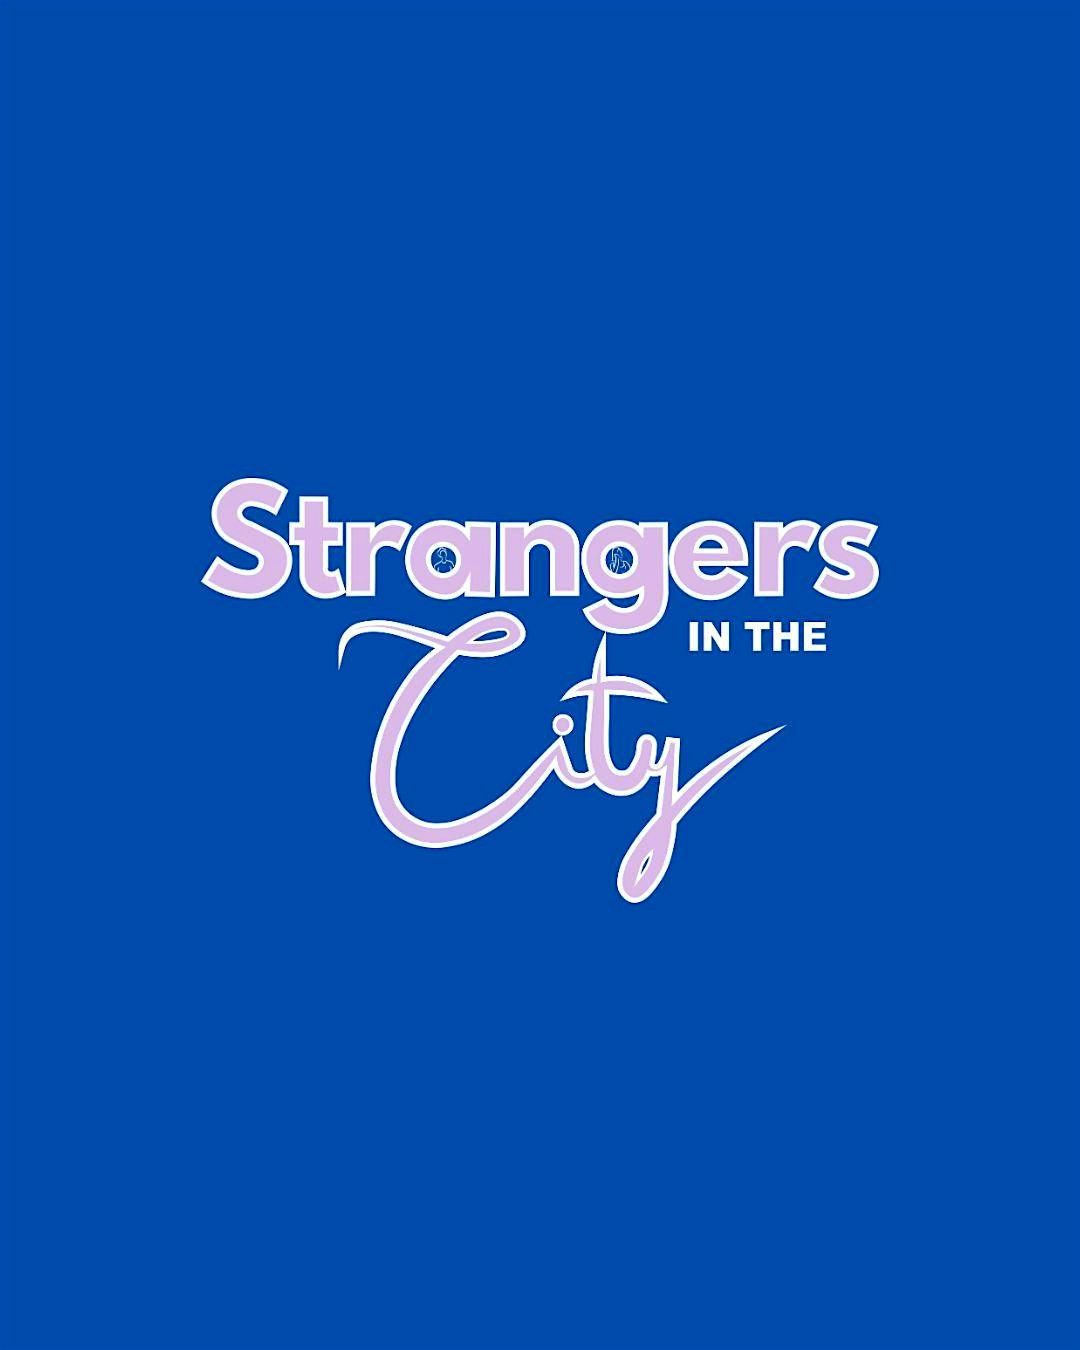 Strangers in the City presents: Pole with Strangers